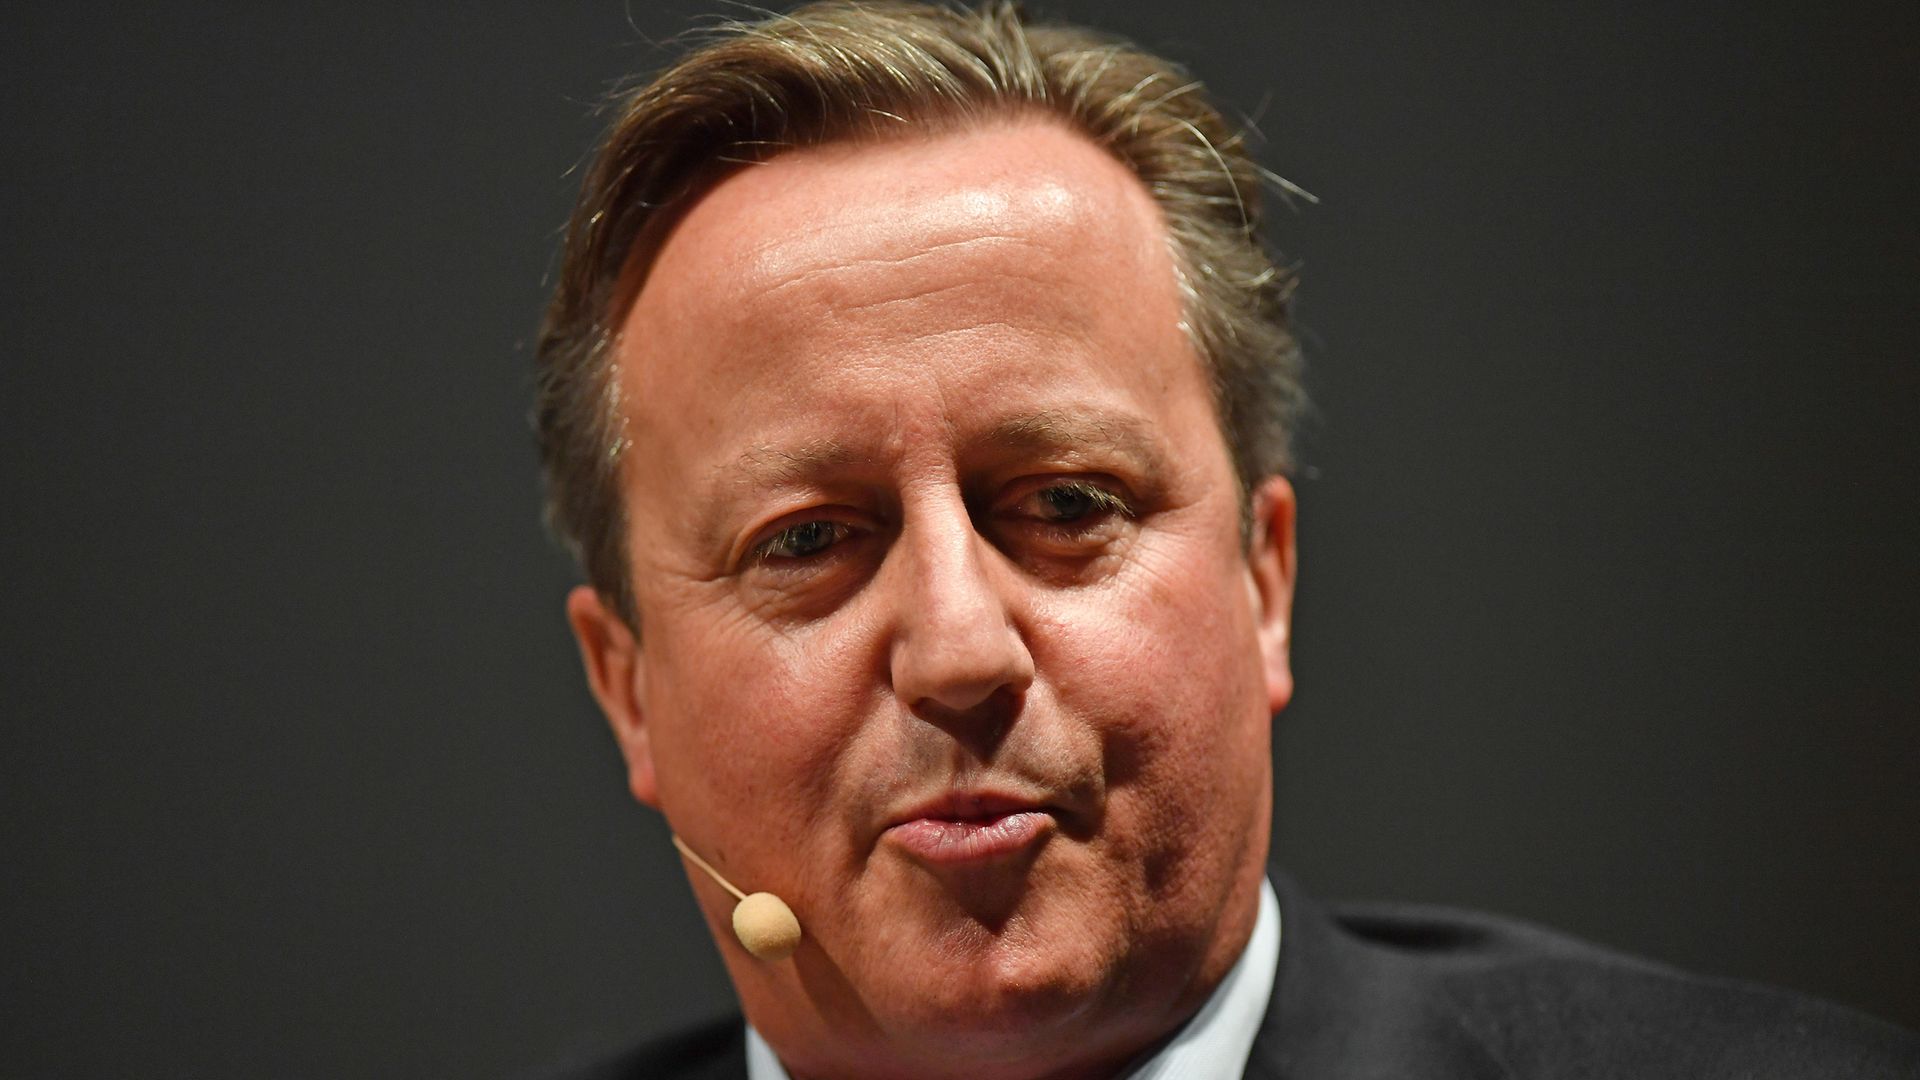 David Cameron is forking out £50k on a heated pool for his home in the Cotswolds - Credit: PA